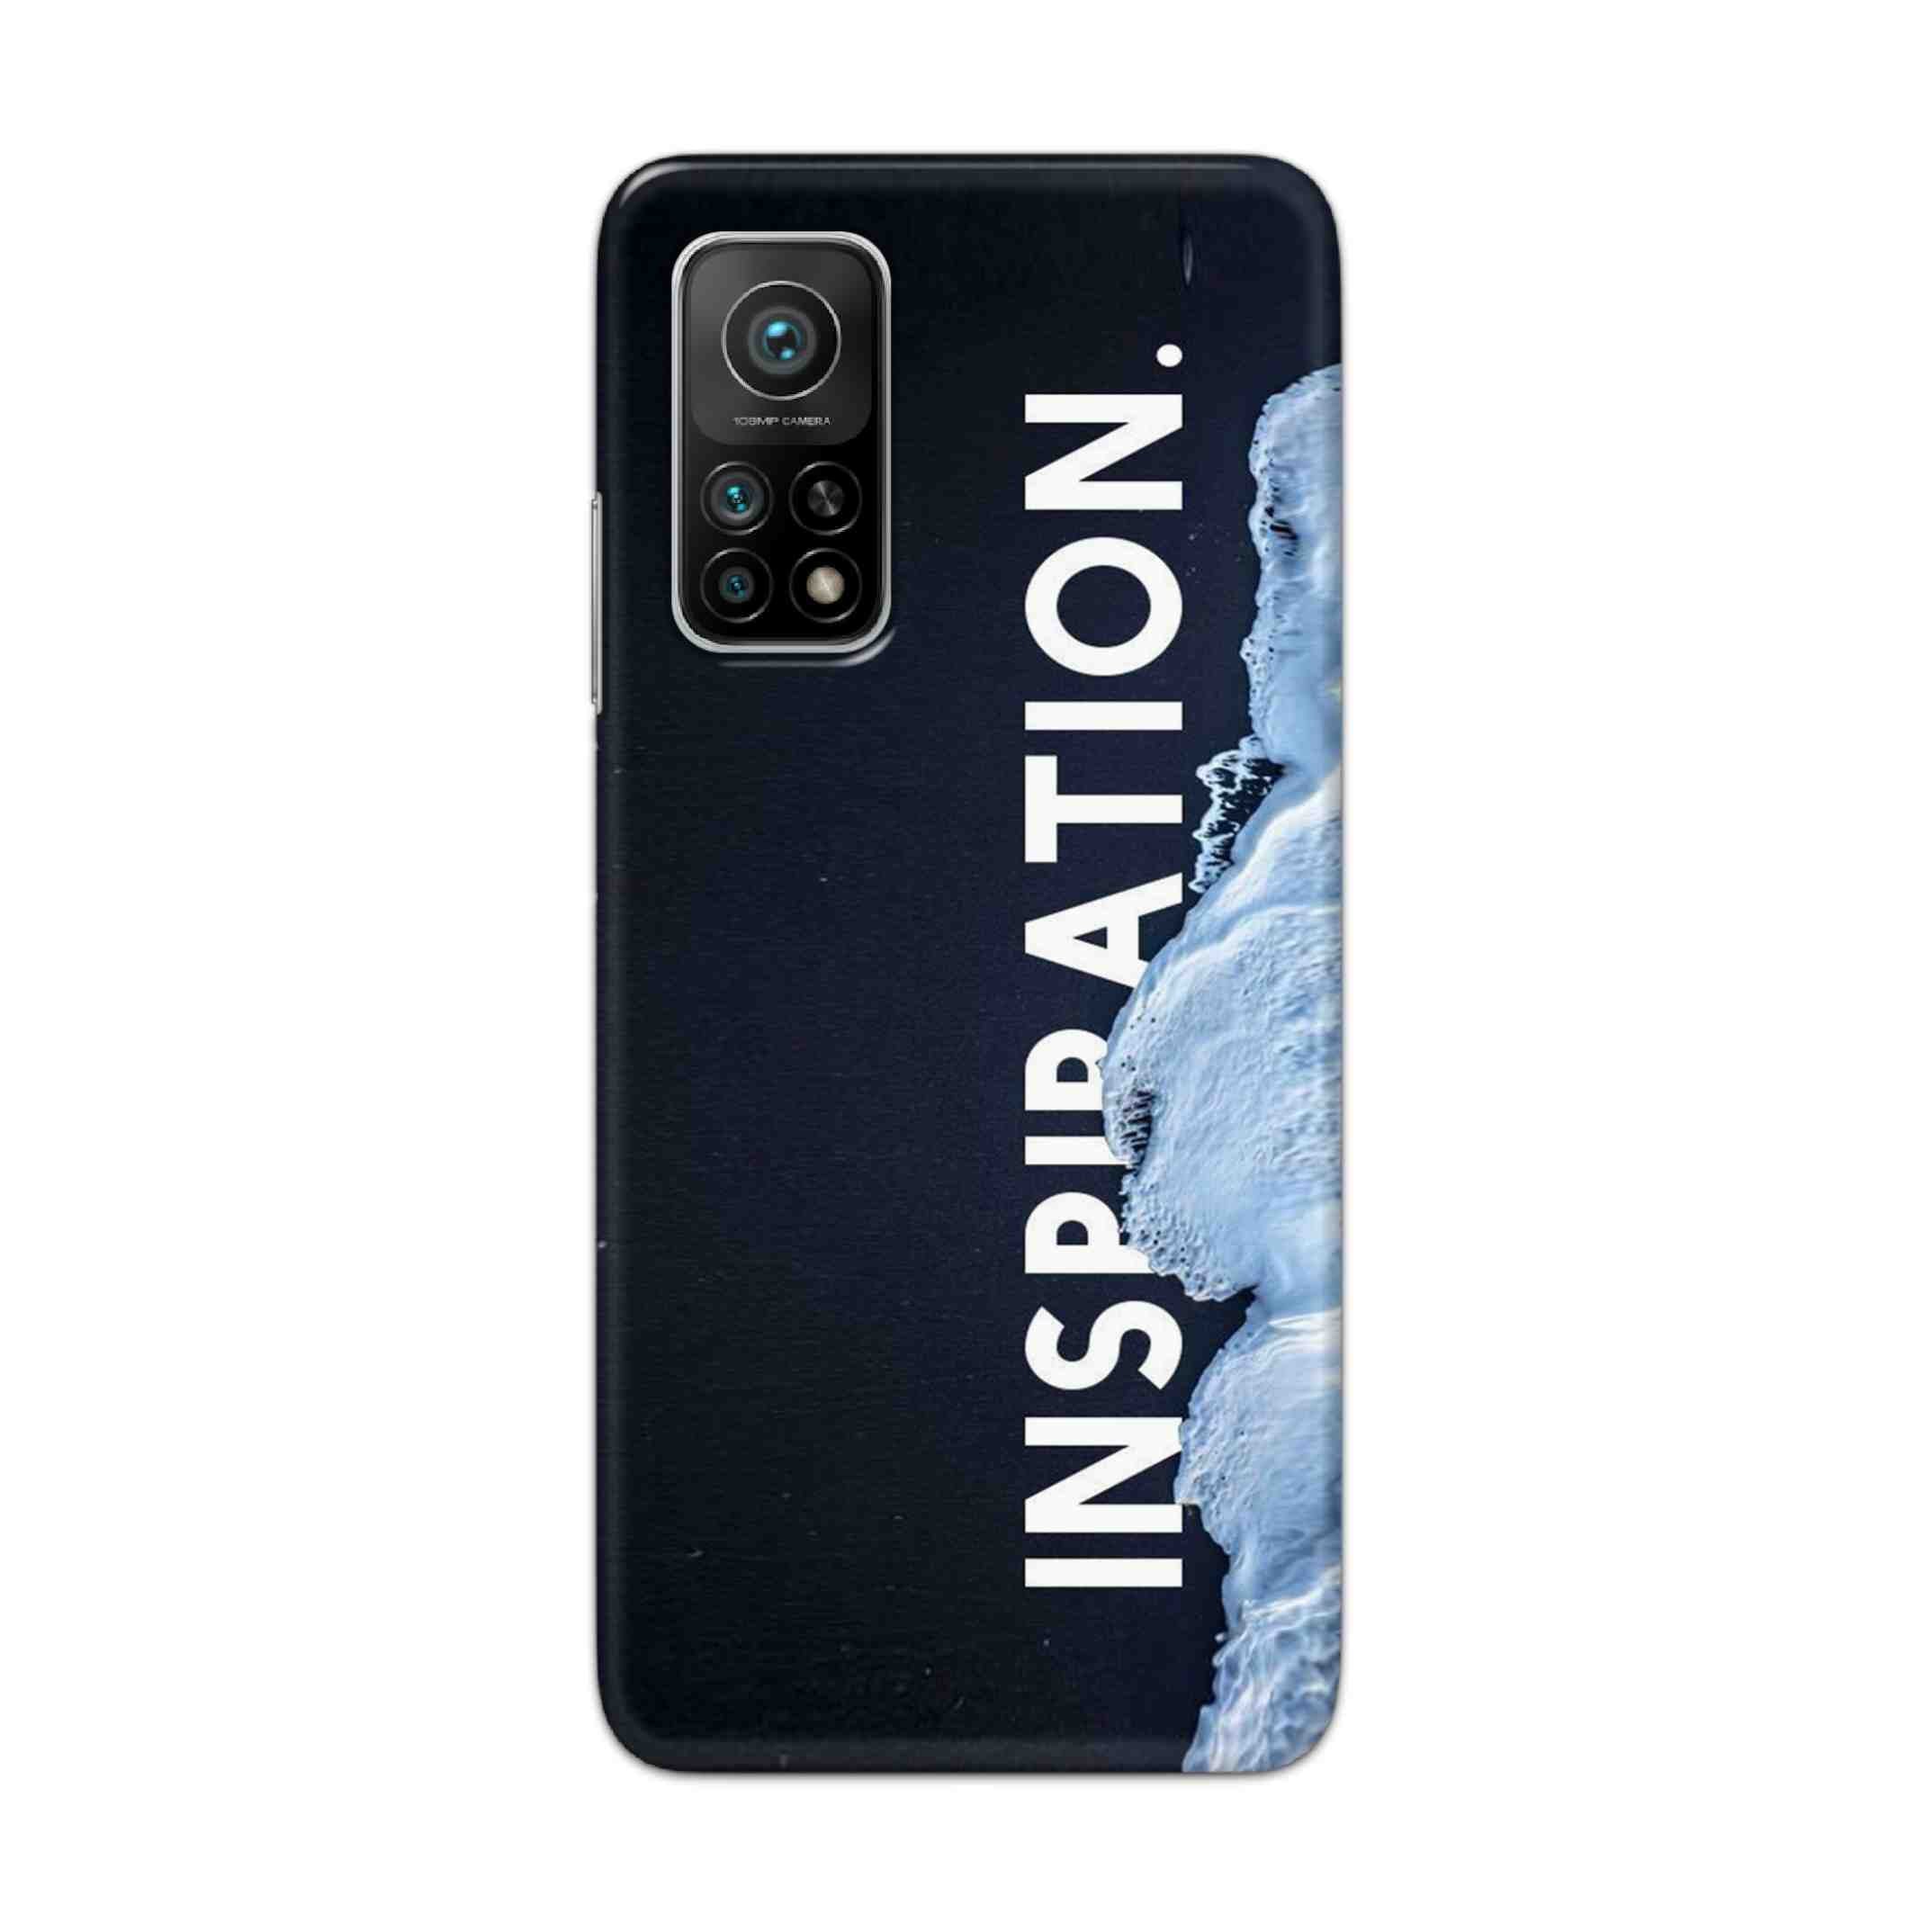 Buy Inspiration Hard Back Mobile Phone Case Cover For Xiaomi Mi 10T 5G Online